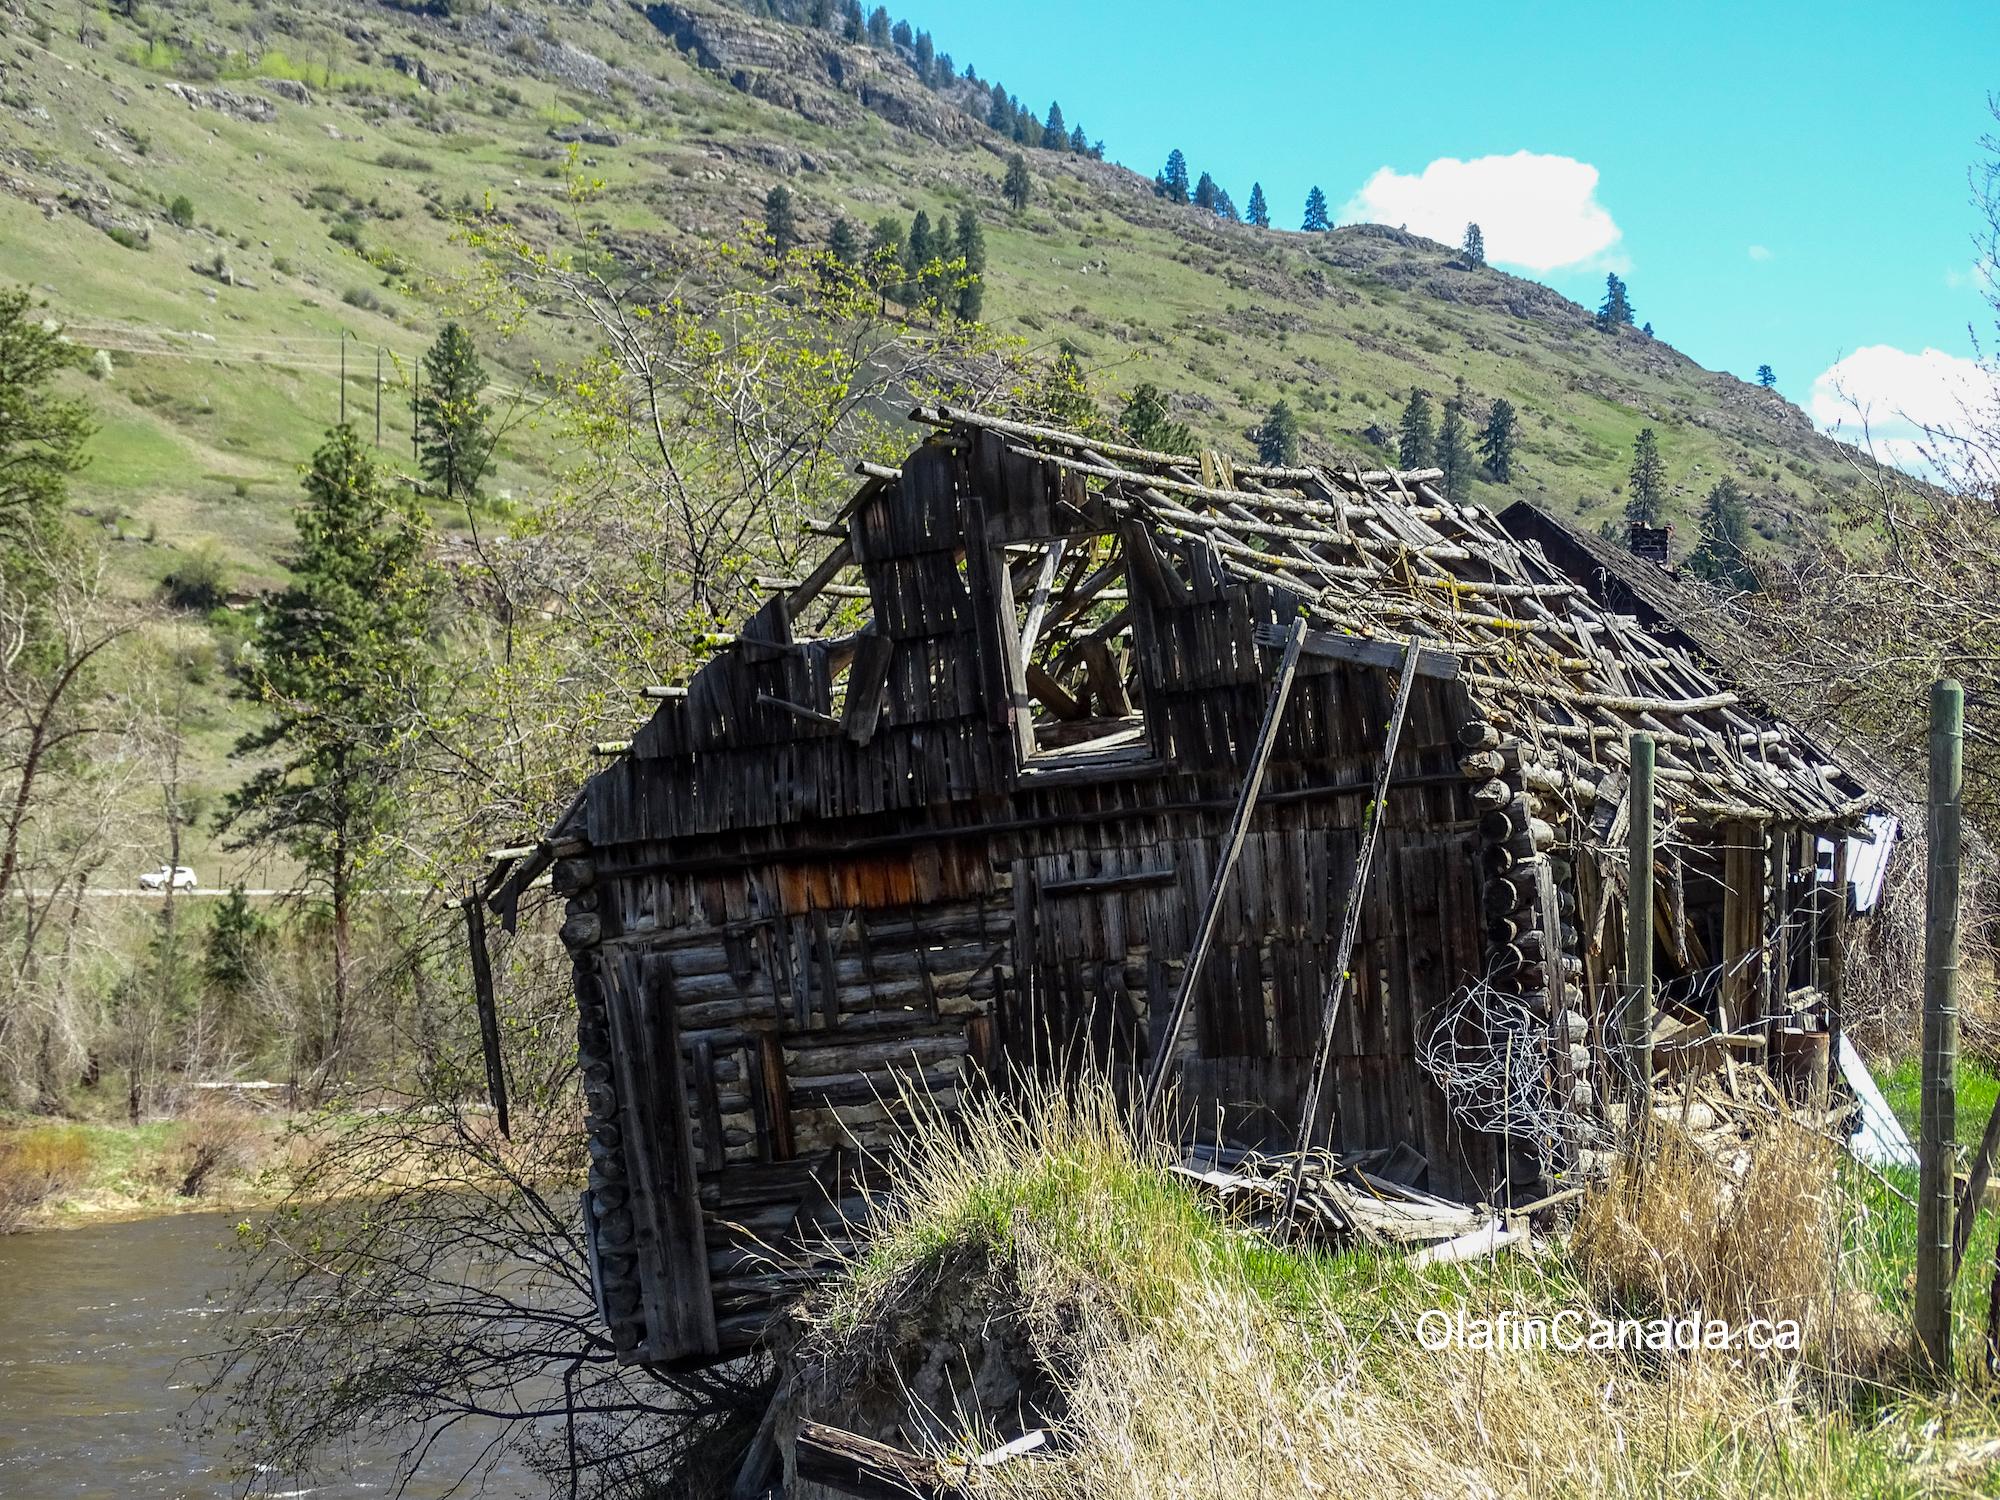 Old shack next to the Kettle River near Gilpin #olafincanada #britishcolumbia #discoverbc #abandonedbc #kettleriver